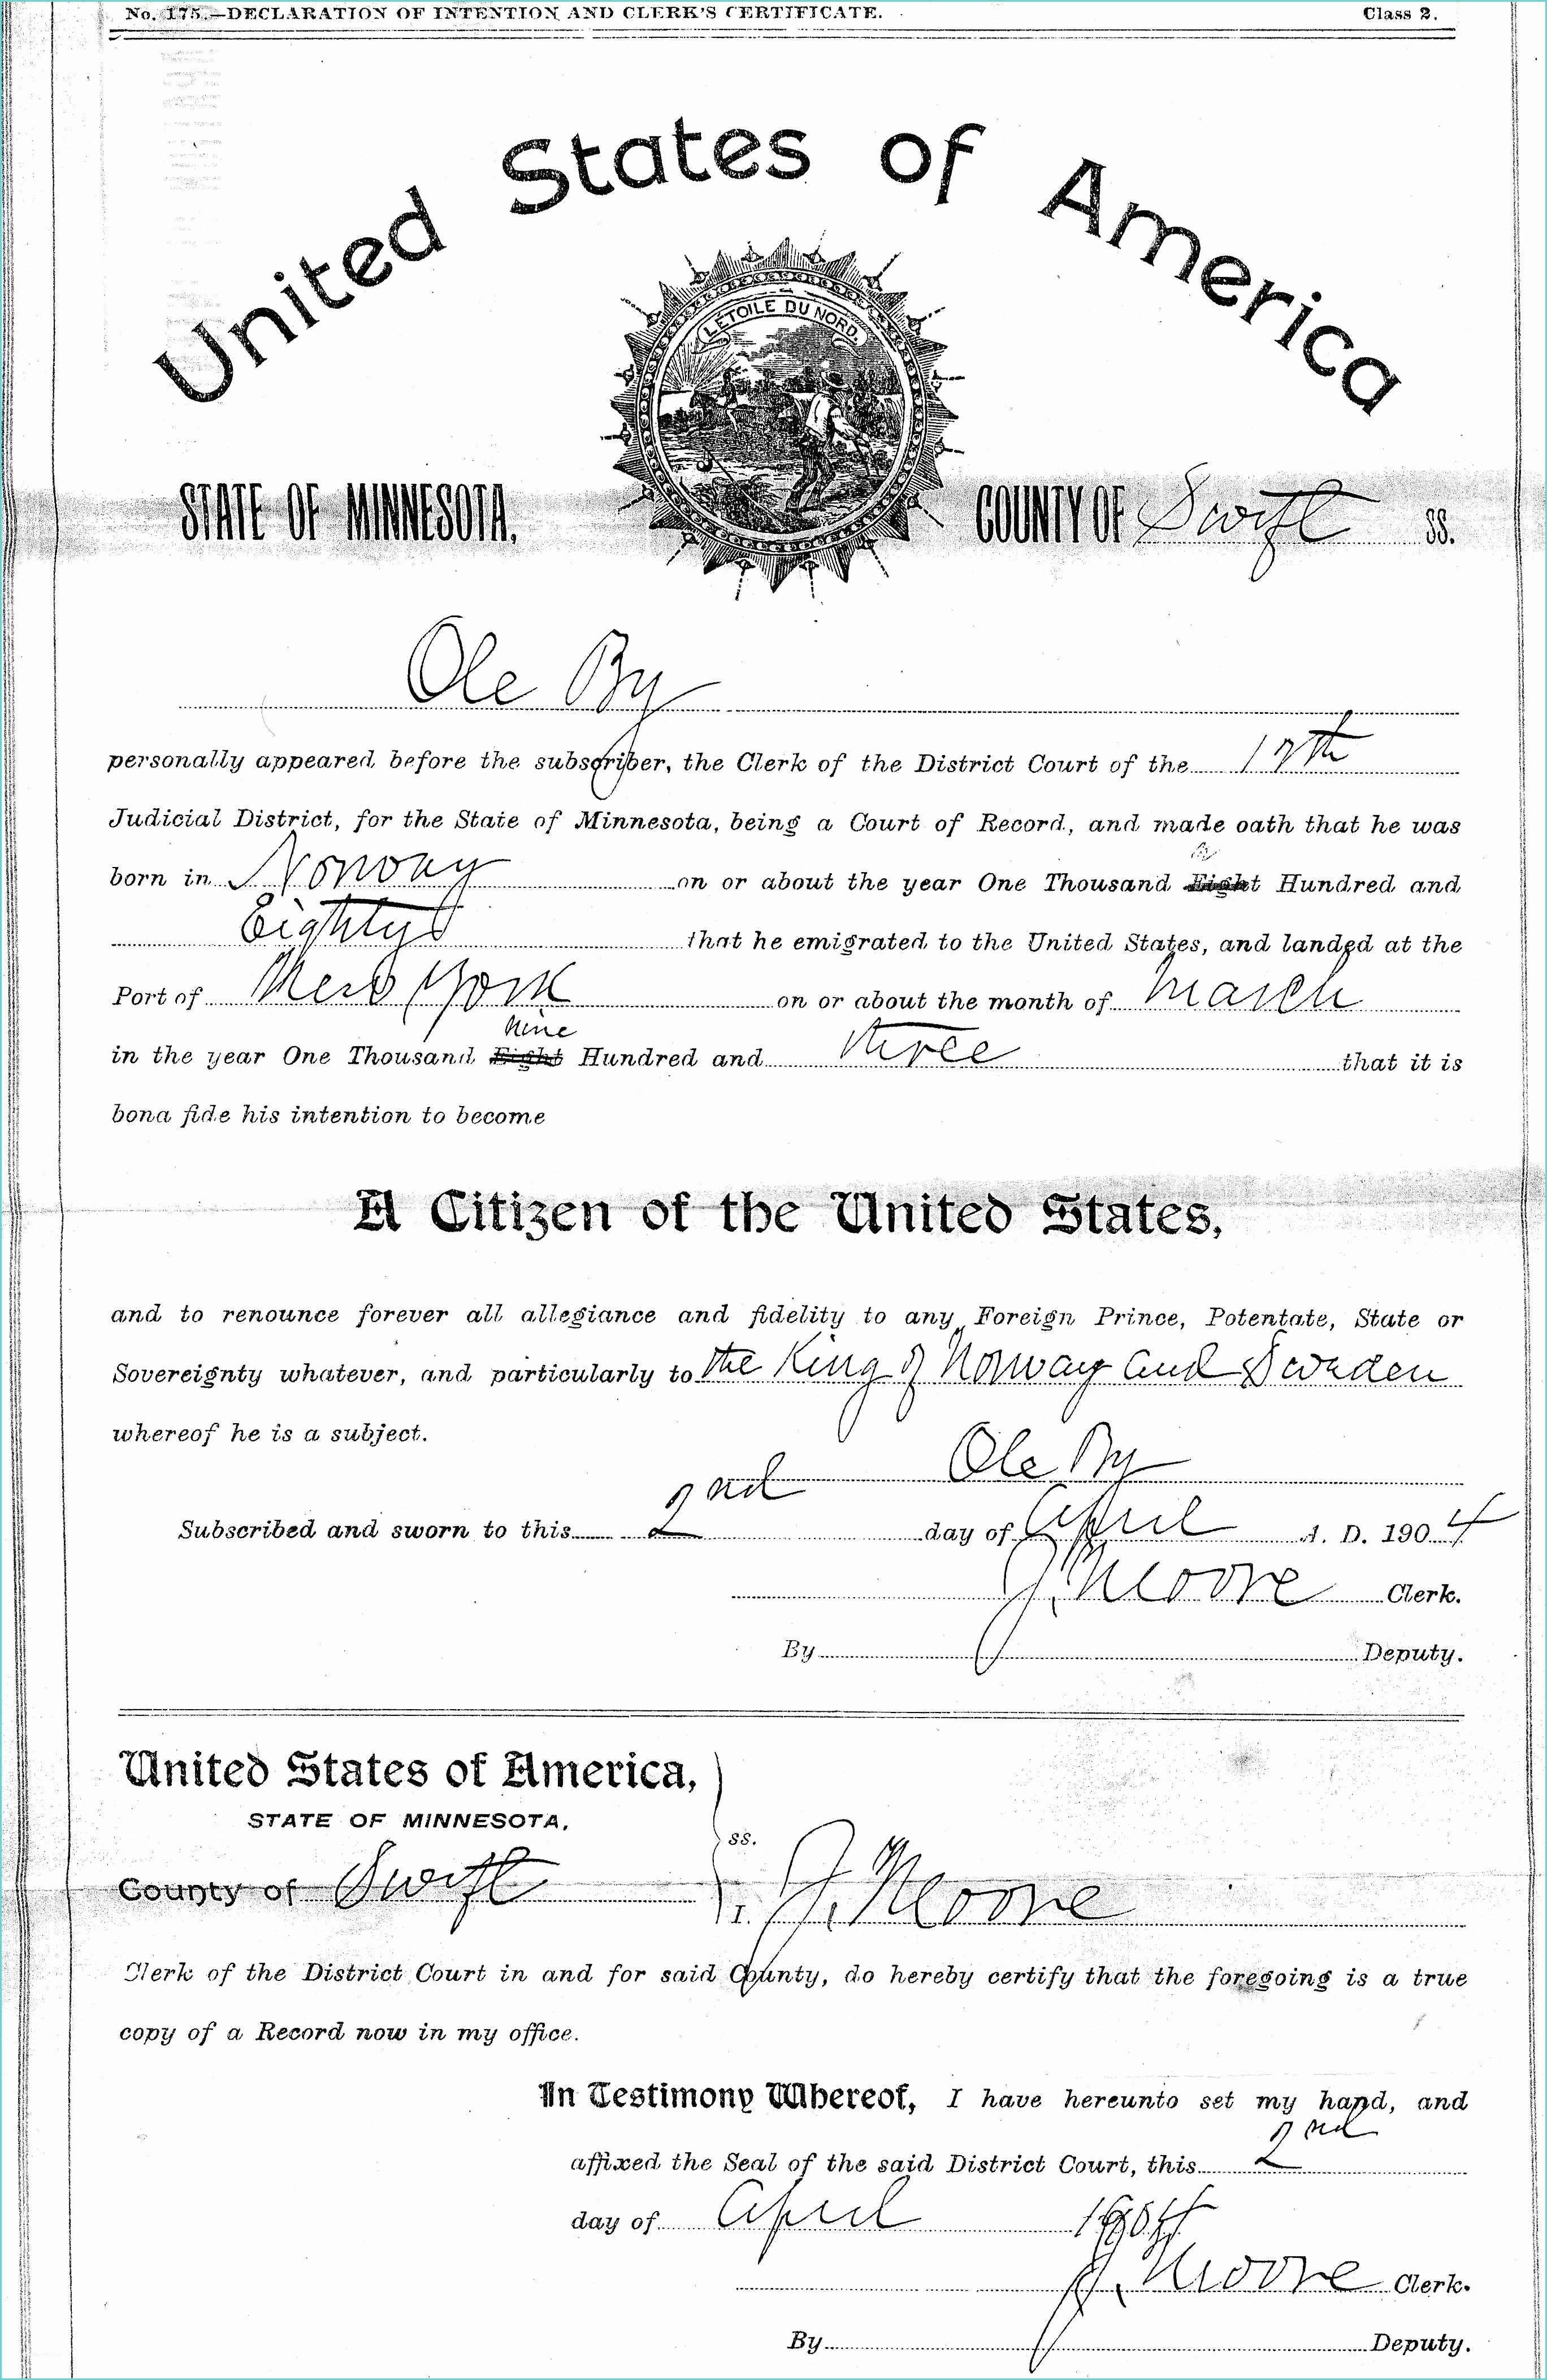 Tax Residency Certificate Usa Sample 4 Ole In the Usa 1903 to 1907